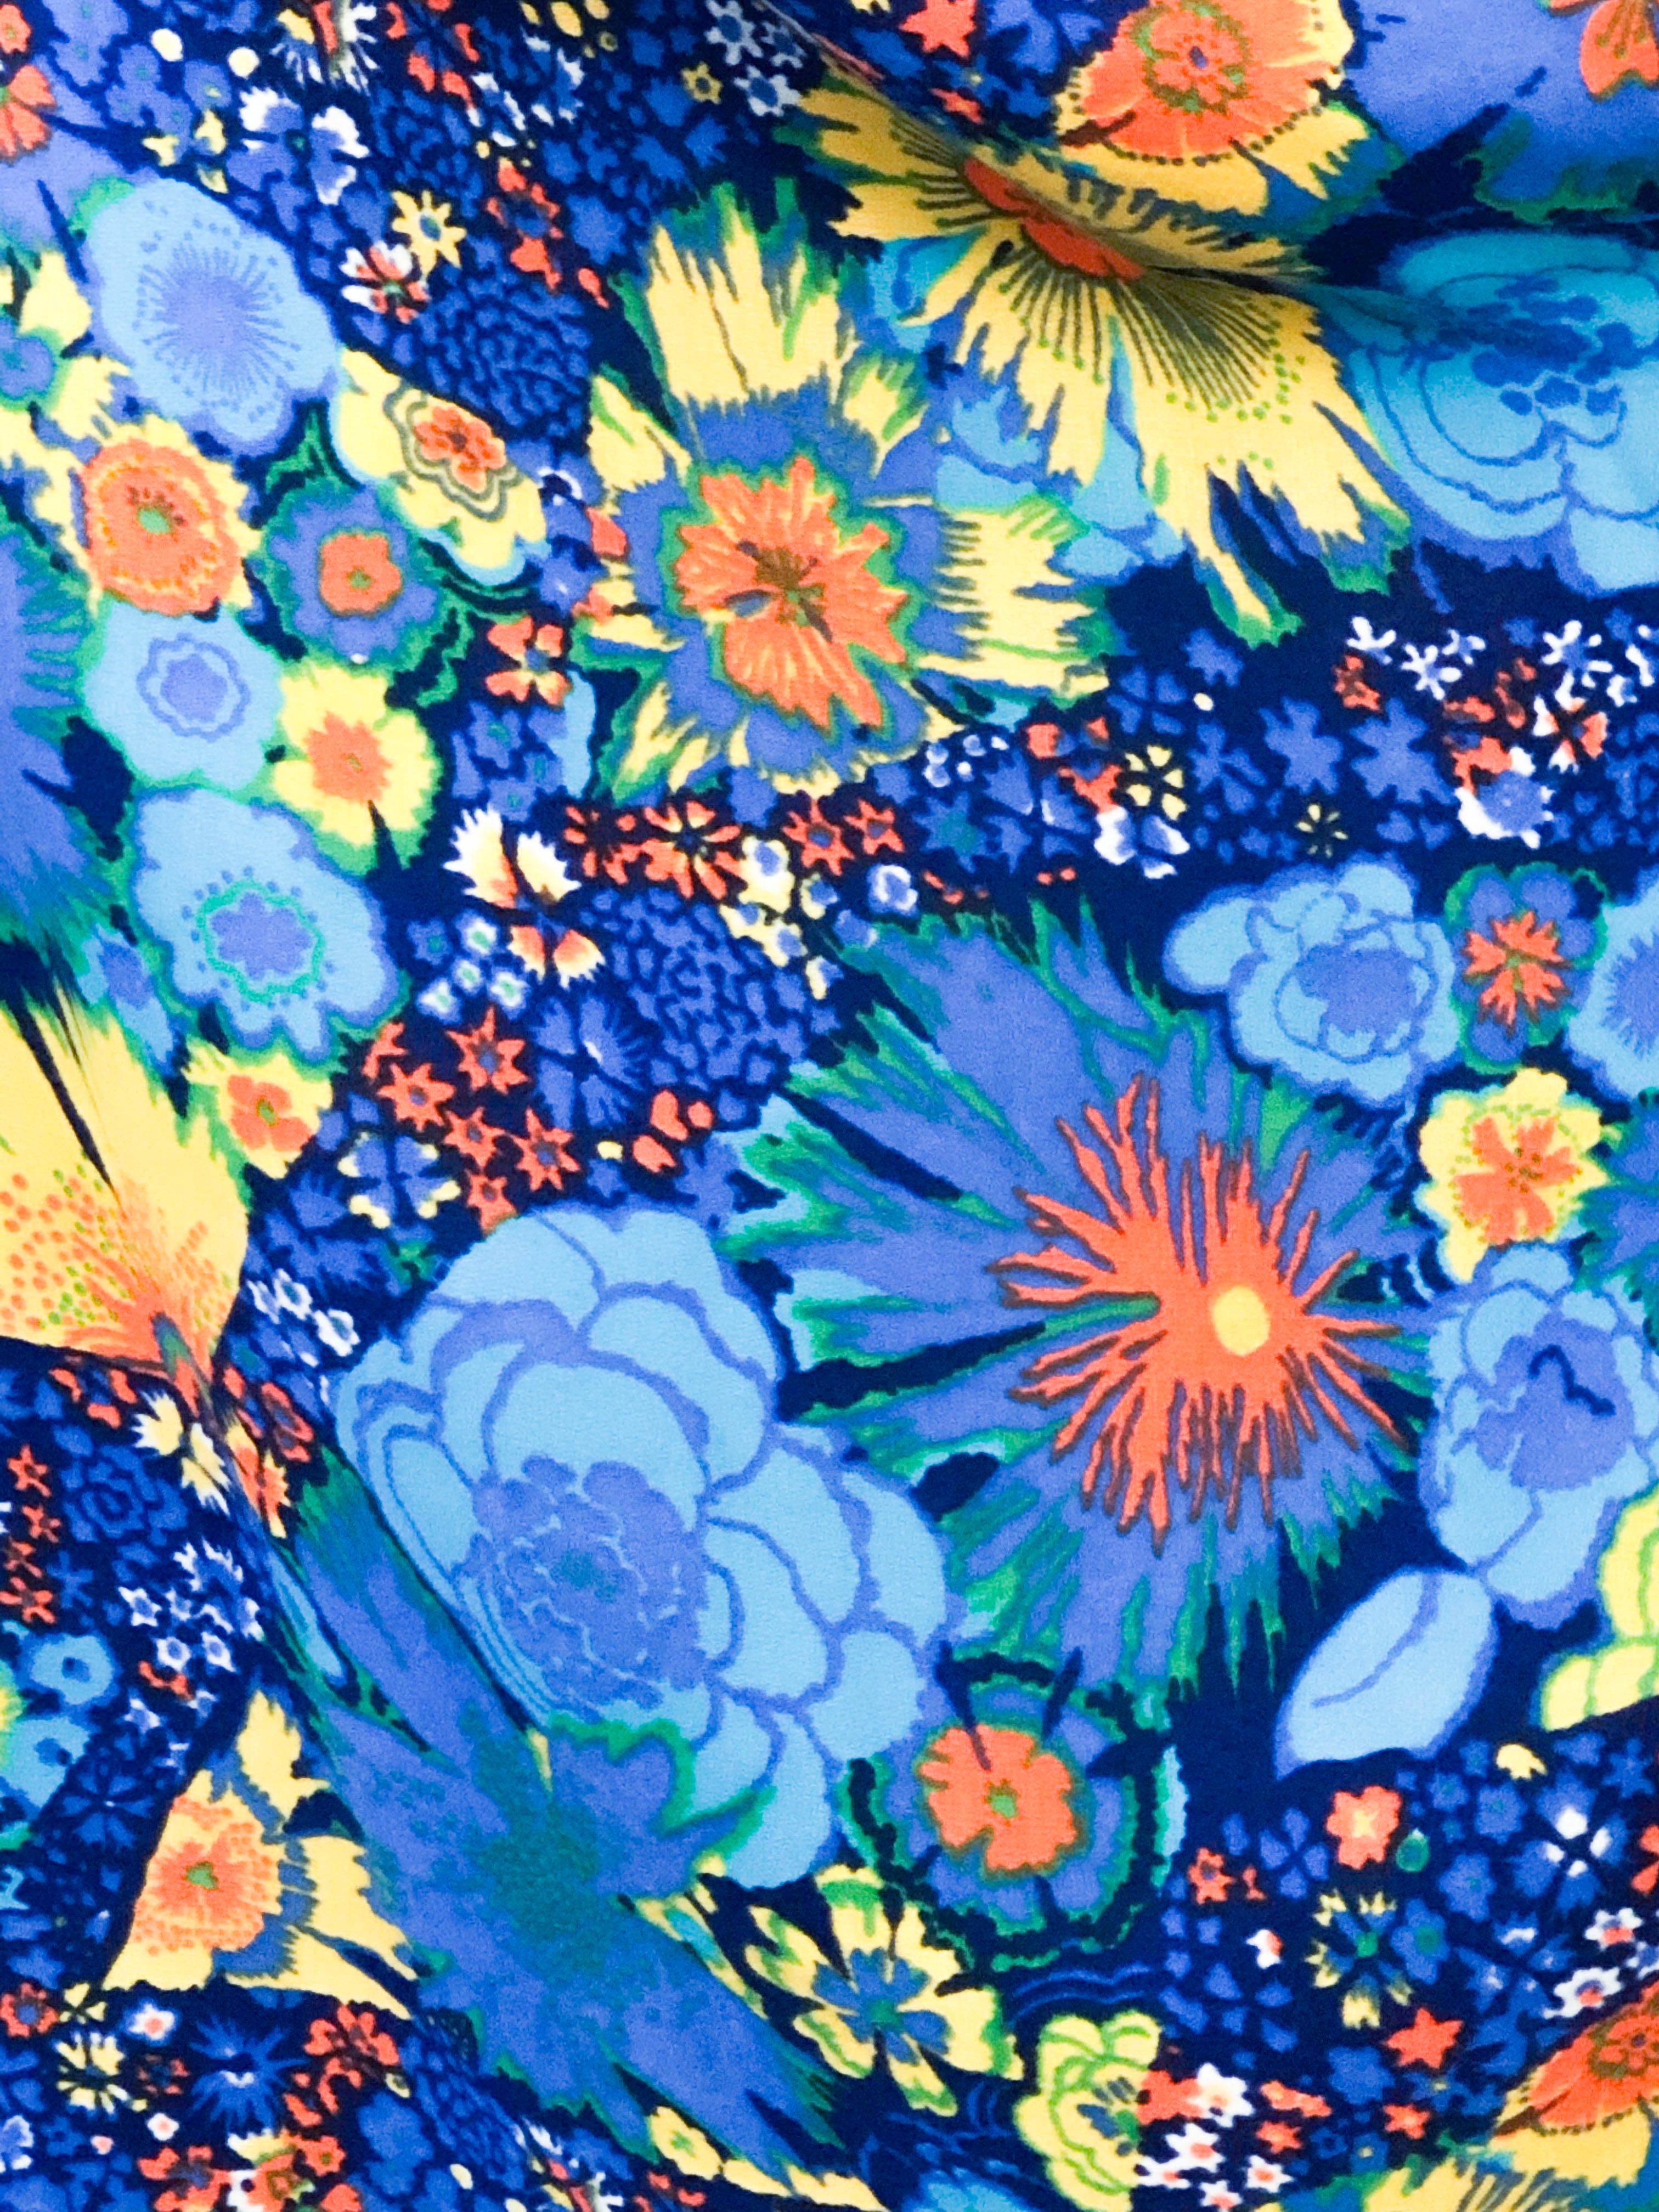 1970's Psychedelic floral printed jumpsuit featuring neon blues, yellows, and oranges. The halter top is secured behind the neck with a tie to complement the plunge back line and the empire waist at the face of the suit. The pants of this suit are